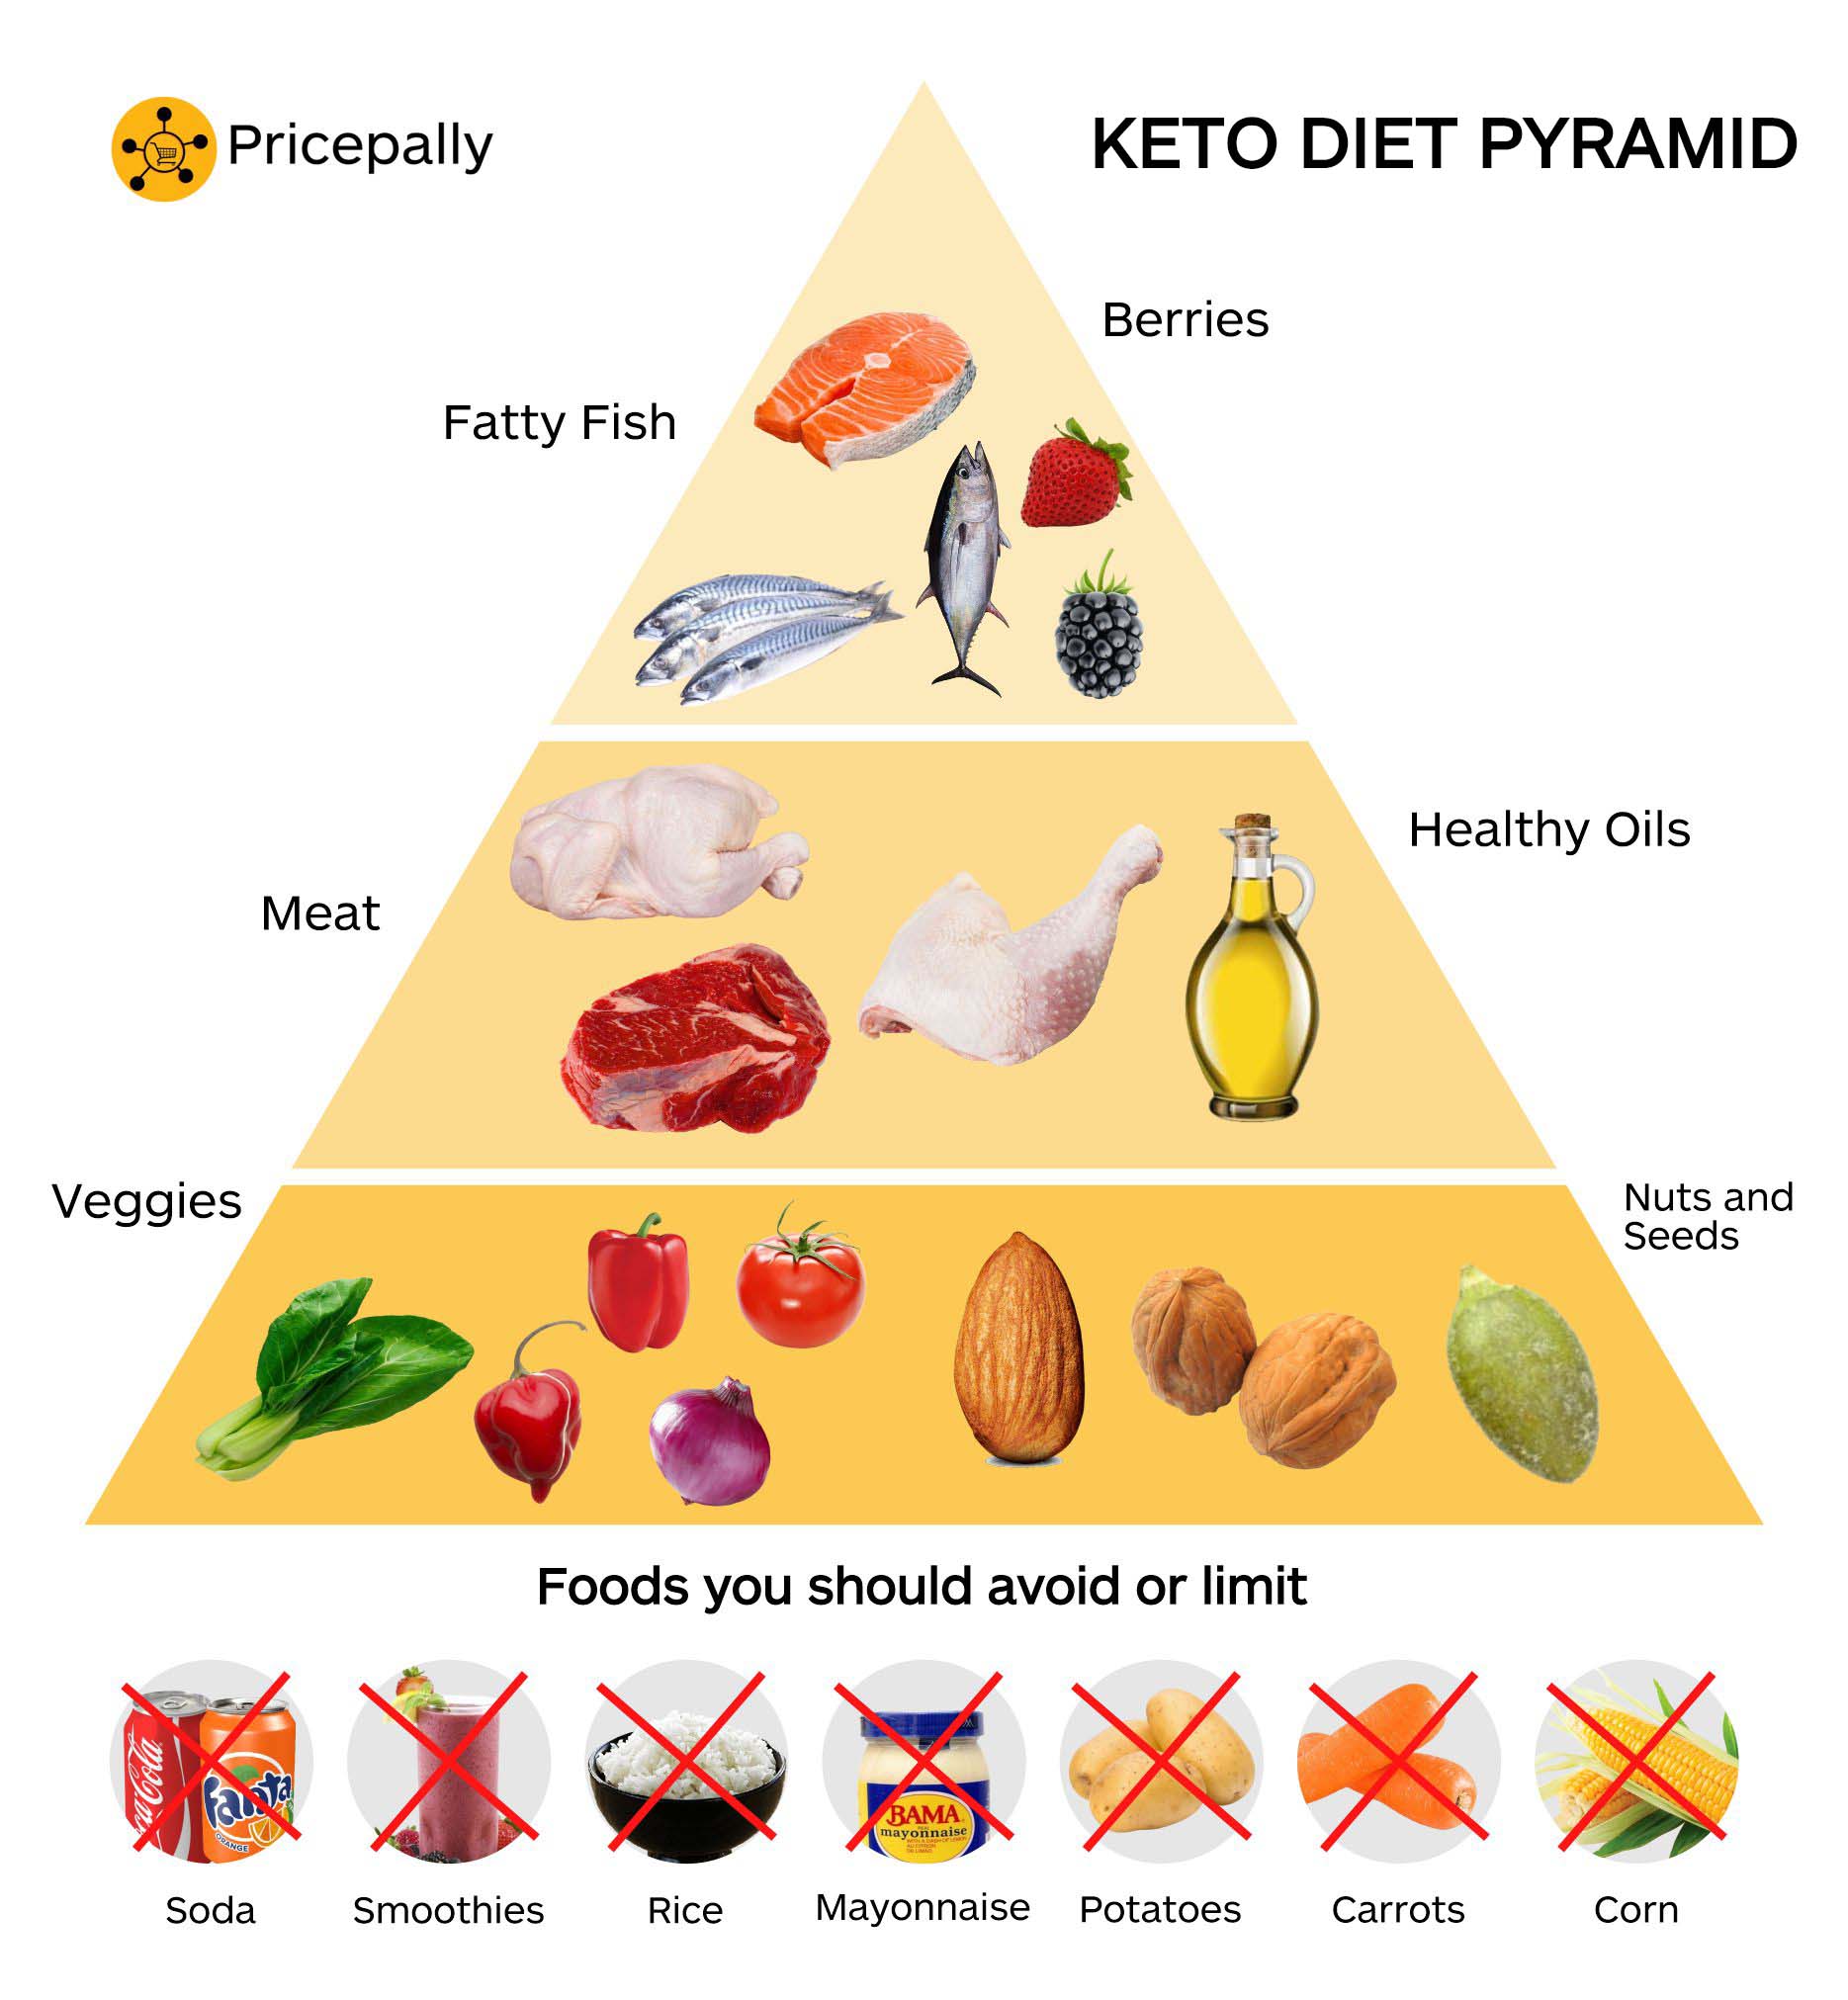 keto pyramid diet that promotes healthy eating habits in busy professionals